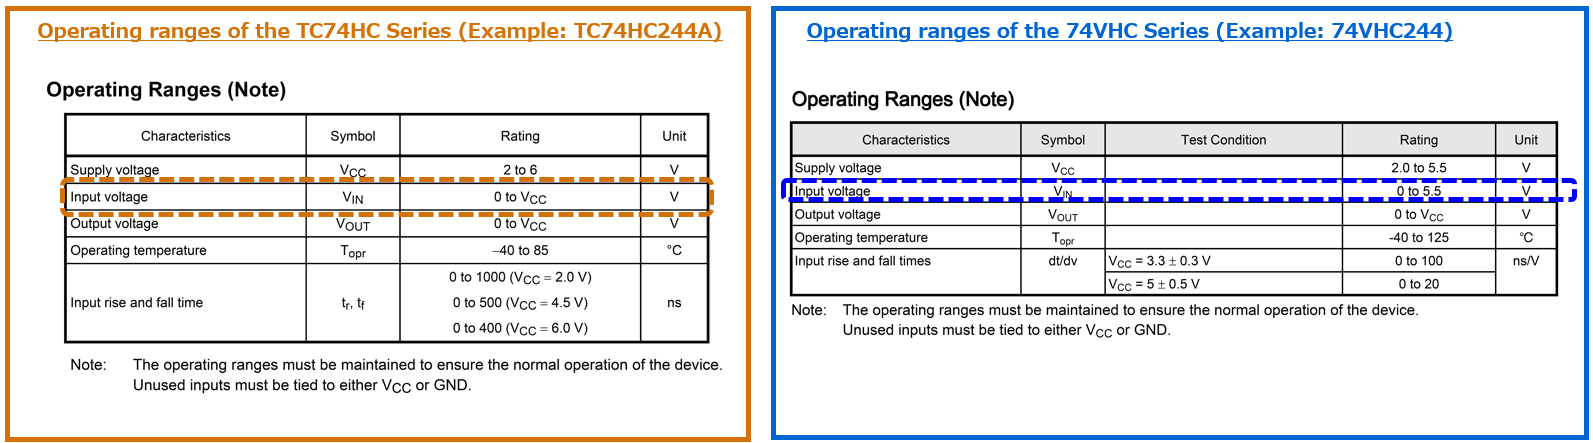 Operating ranges of the TC74HC Series/Operating ranges of the 74VHC Series 